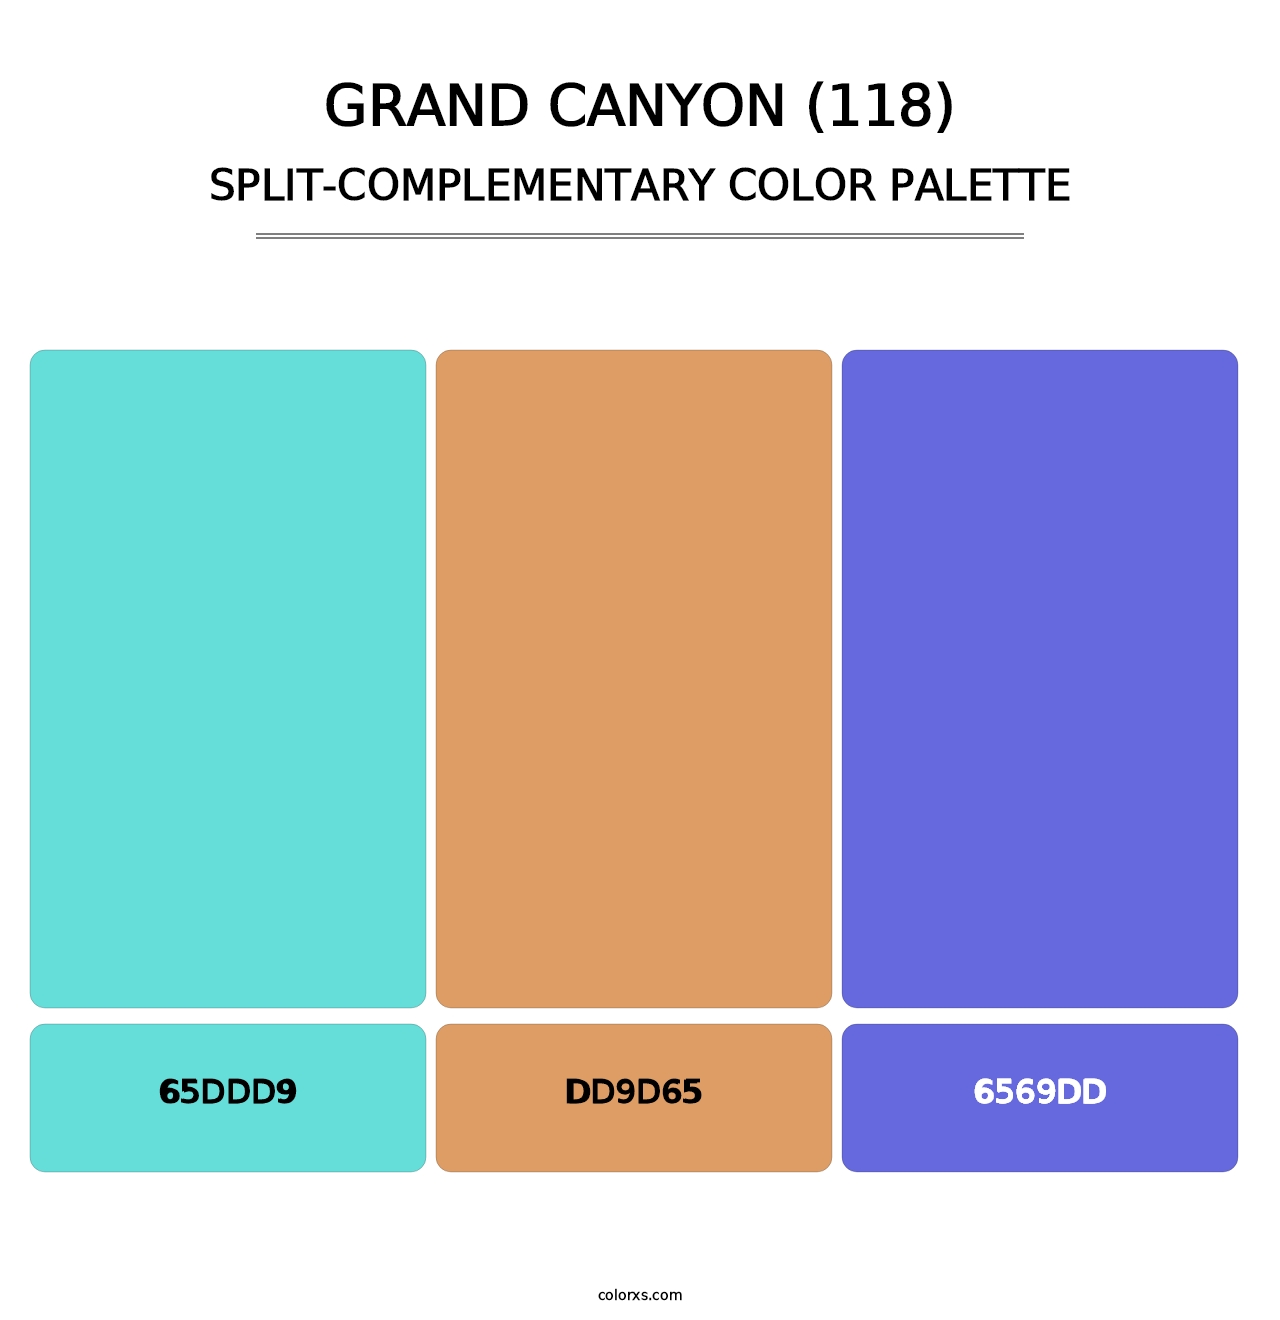 Grand Canyon (118) - Split-Complementary Color Palette